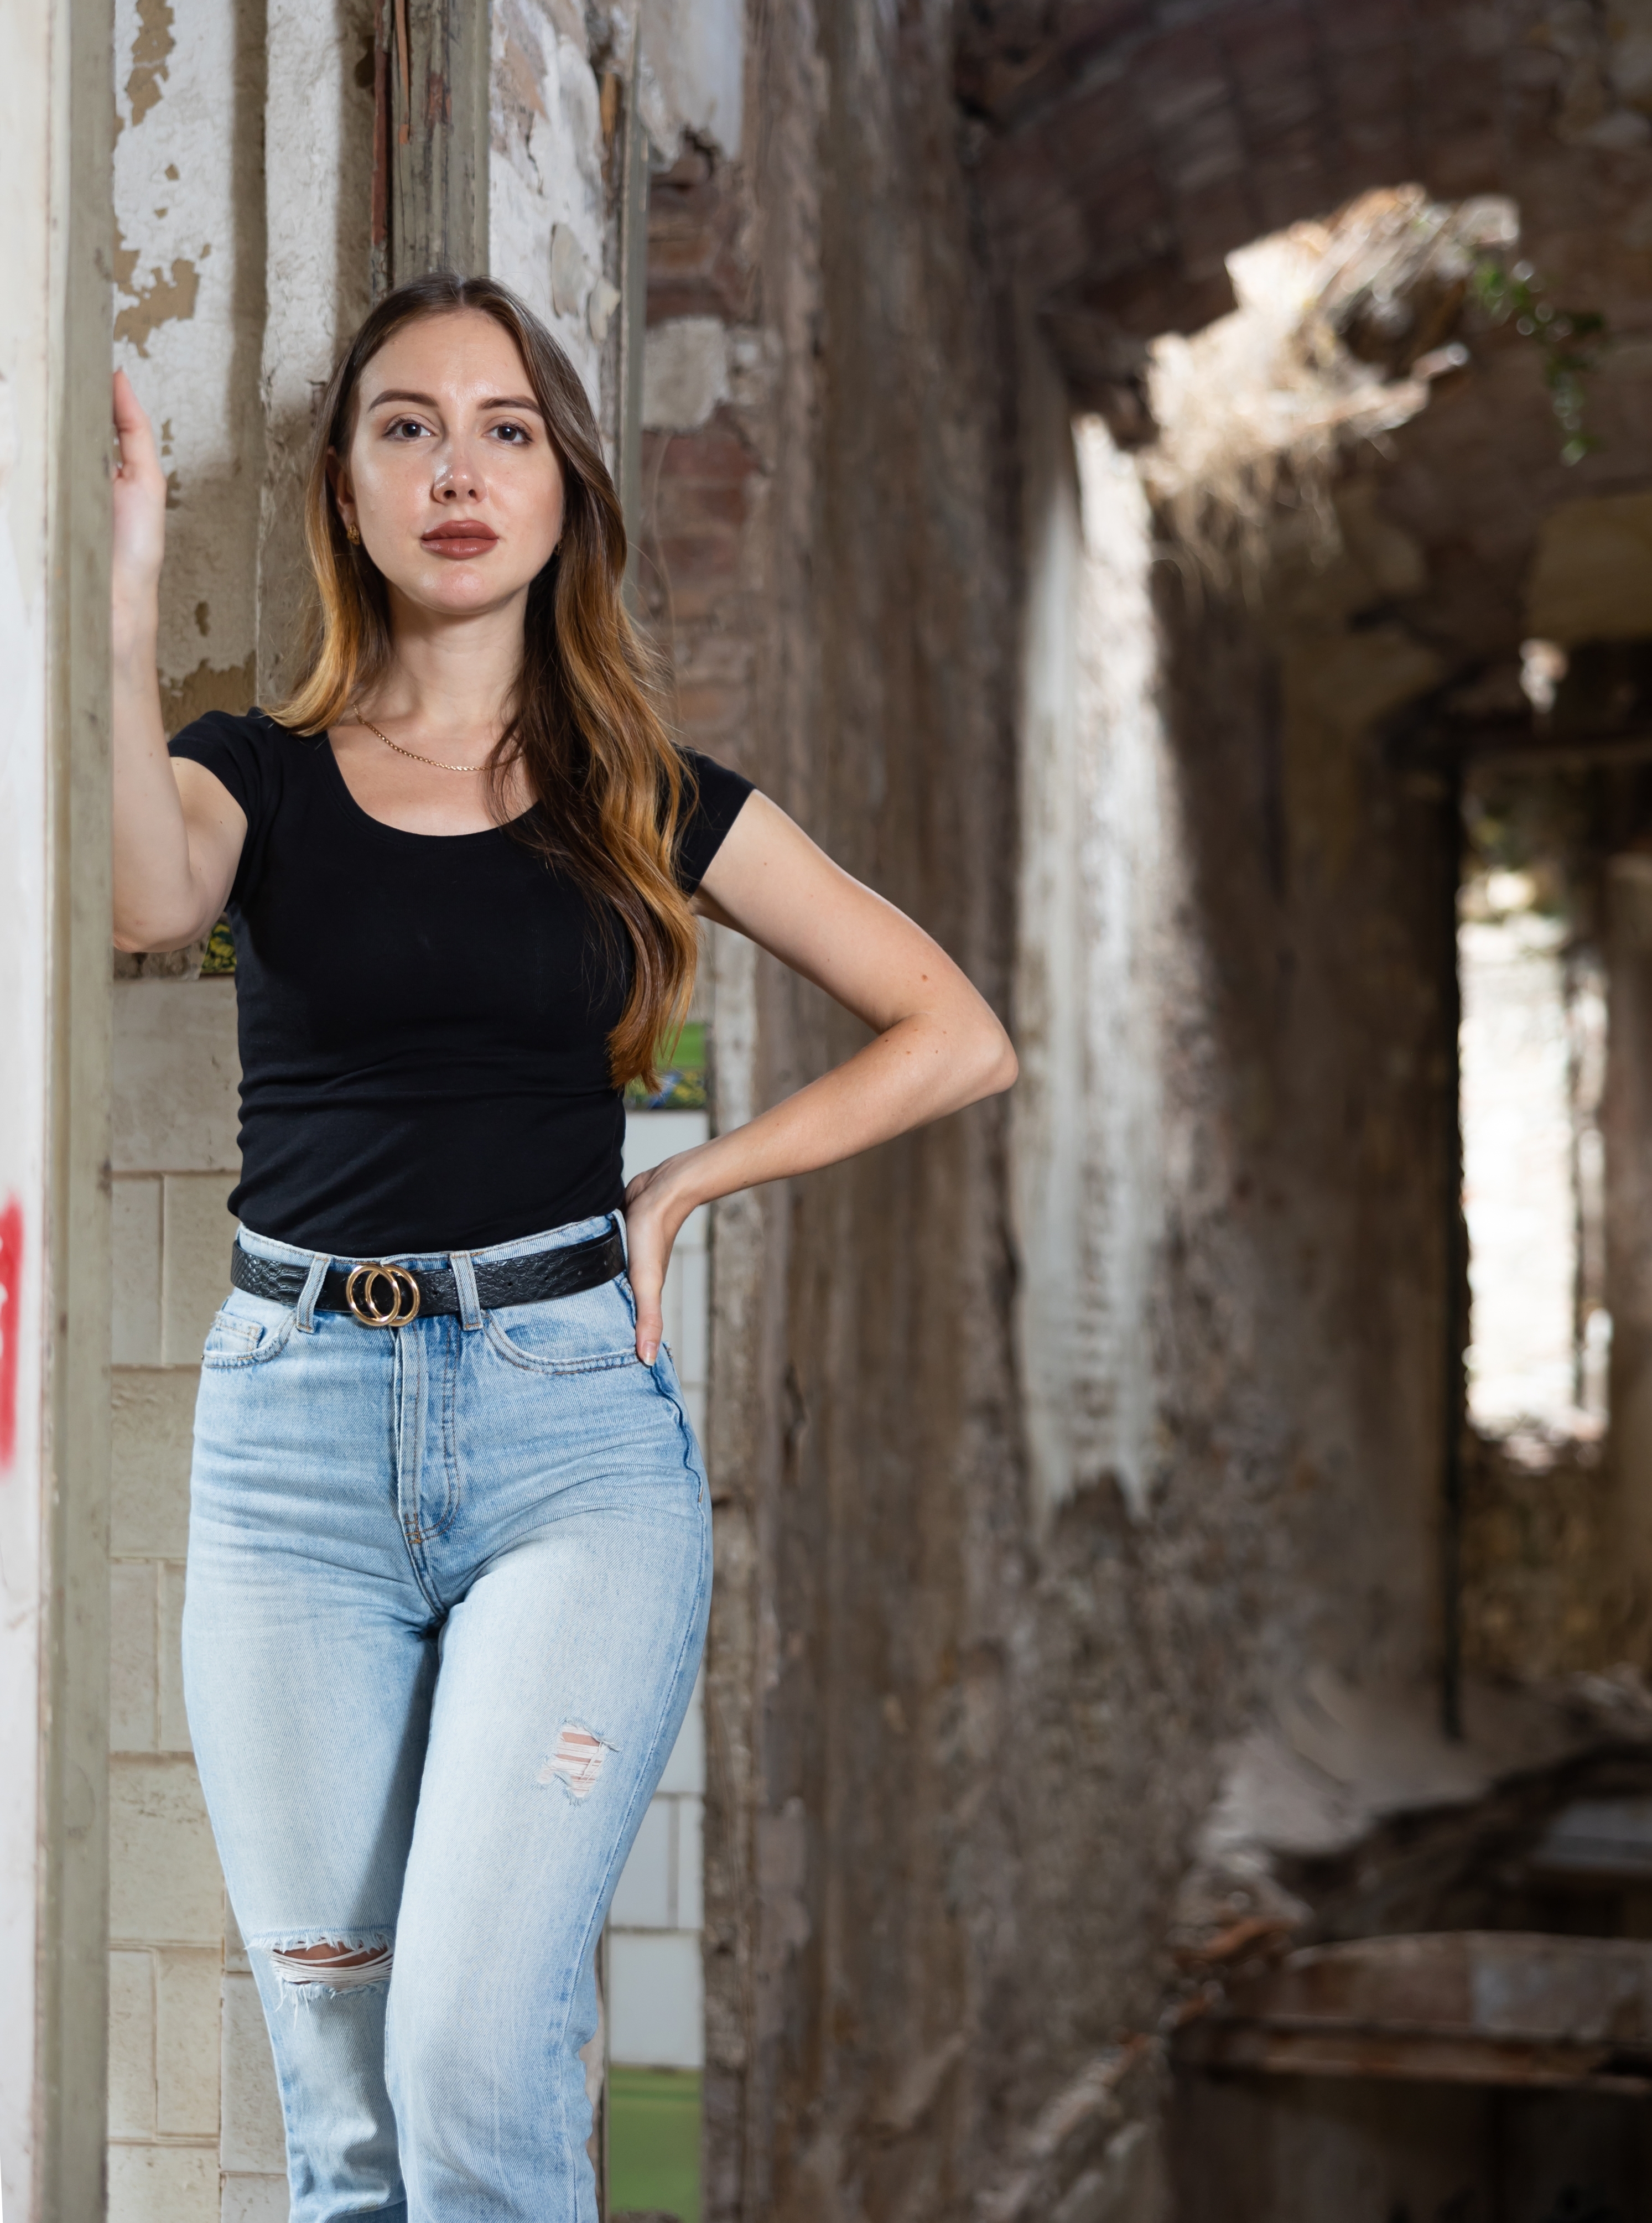 Photo of sensual young european woman inside of deserted building | Source: Shutterstock.com